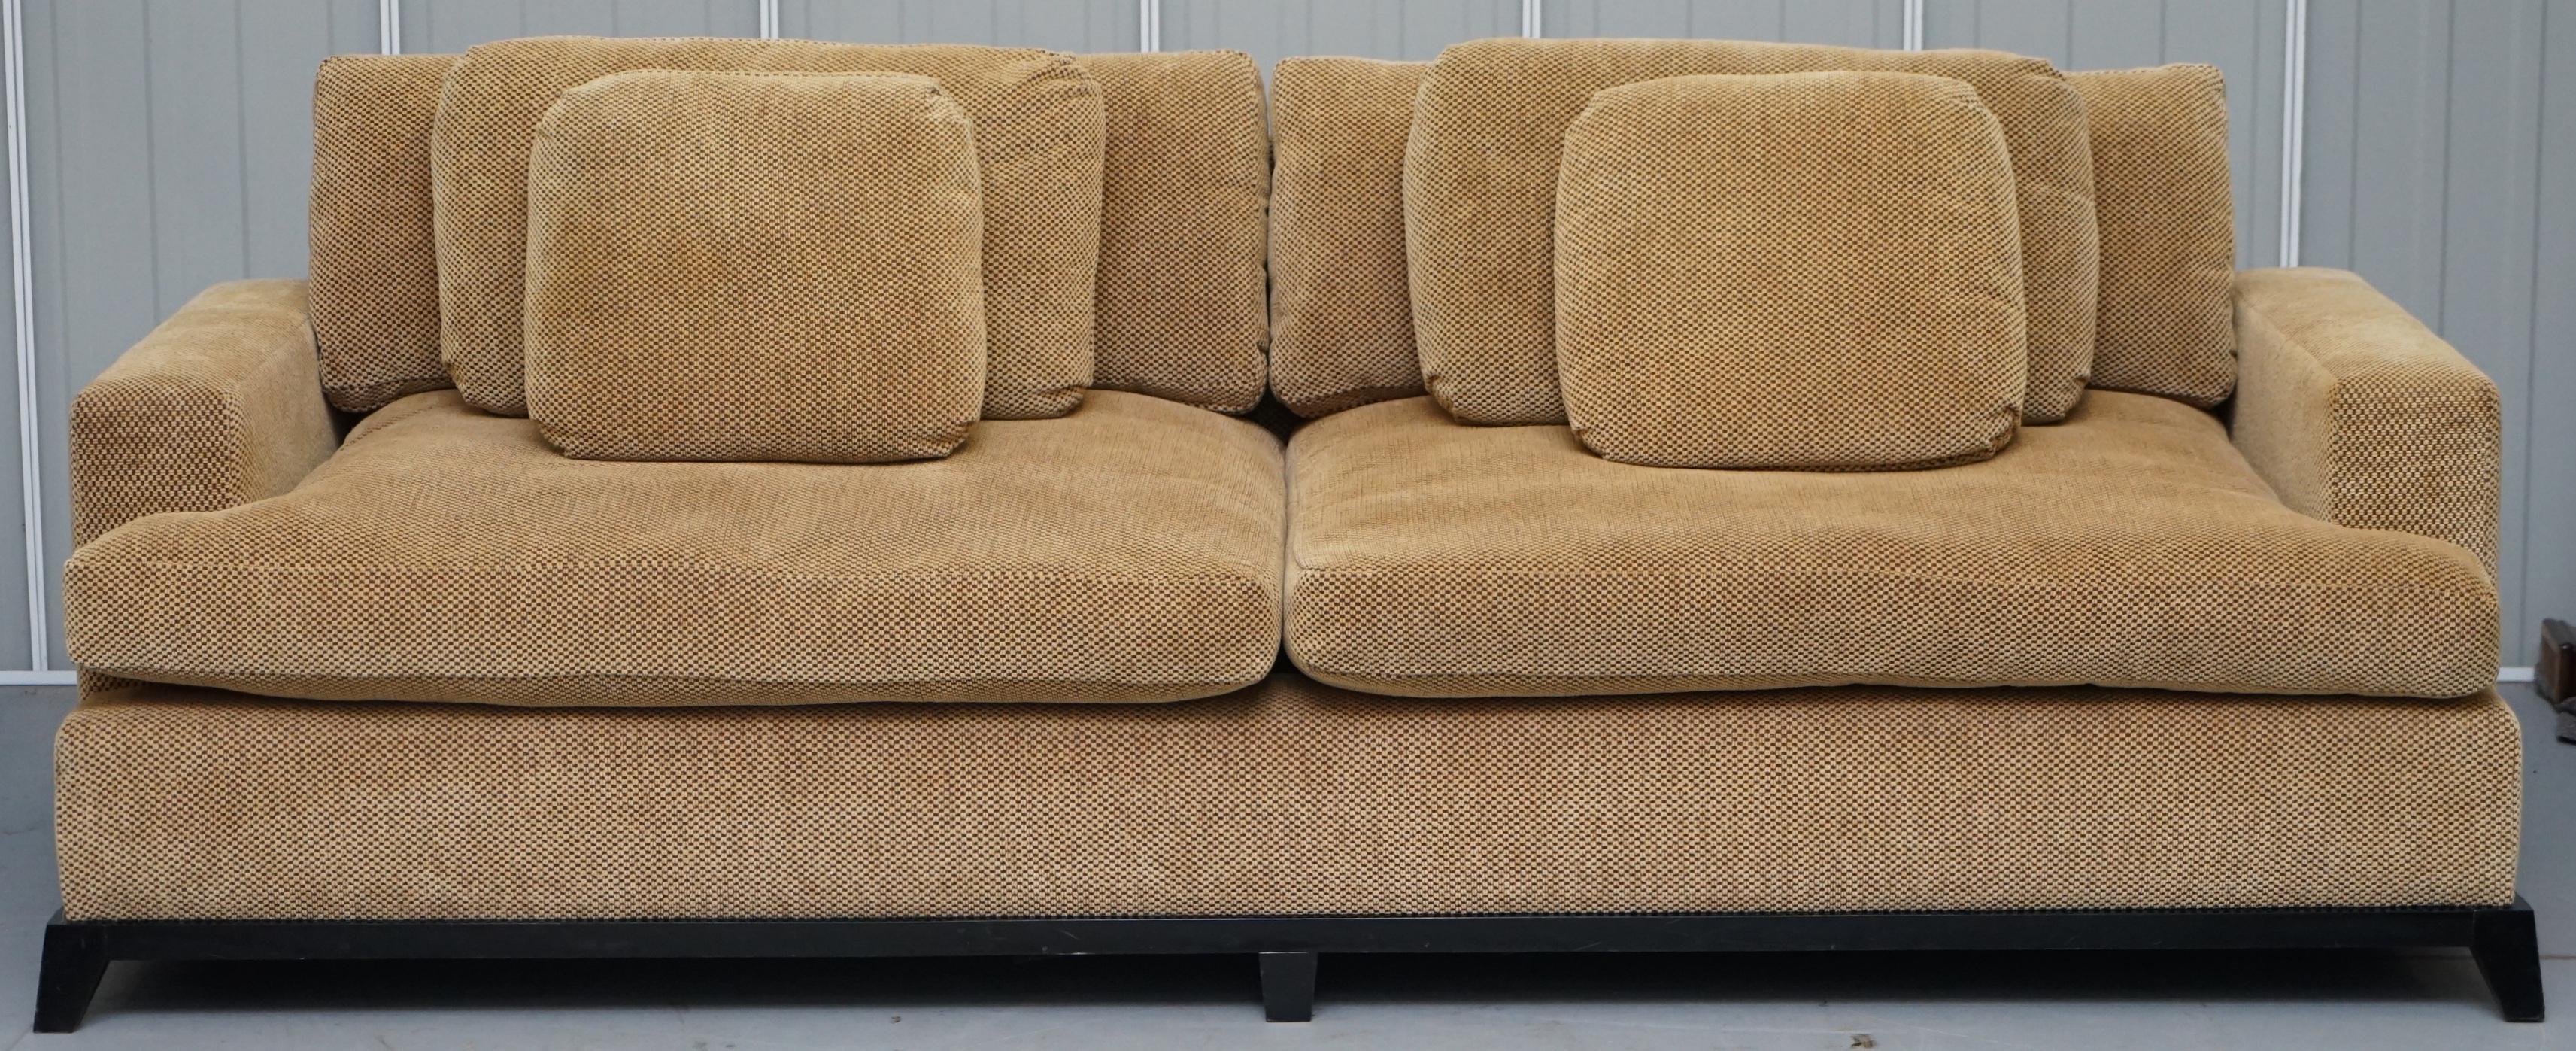 We are delighted to offer for sale this lovely RRP £12,000 George Smith Signature square arm sofa with feather filled cushions which is part of a set

I have this sofa which is a 3-4 seater and I have the smaller 2-3 seat version listed under my